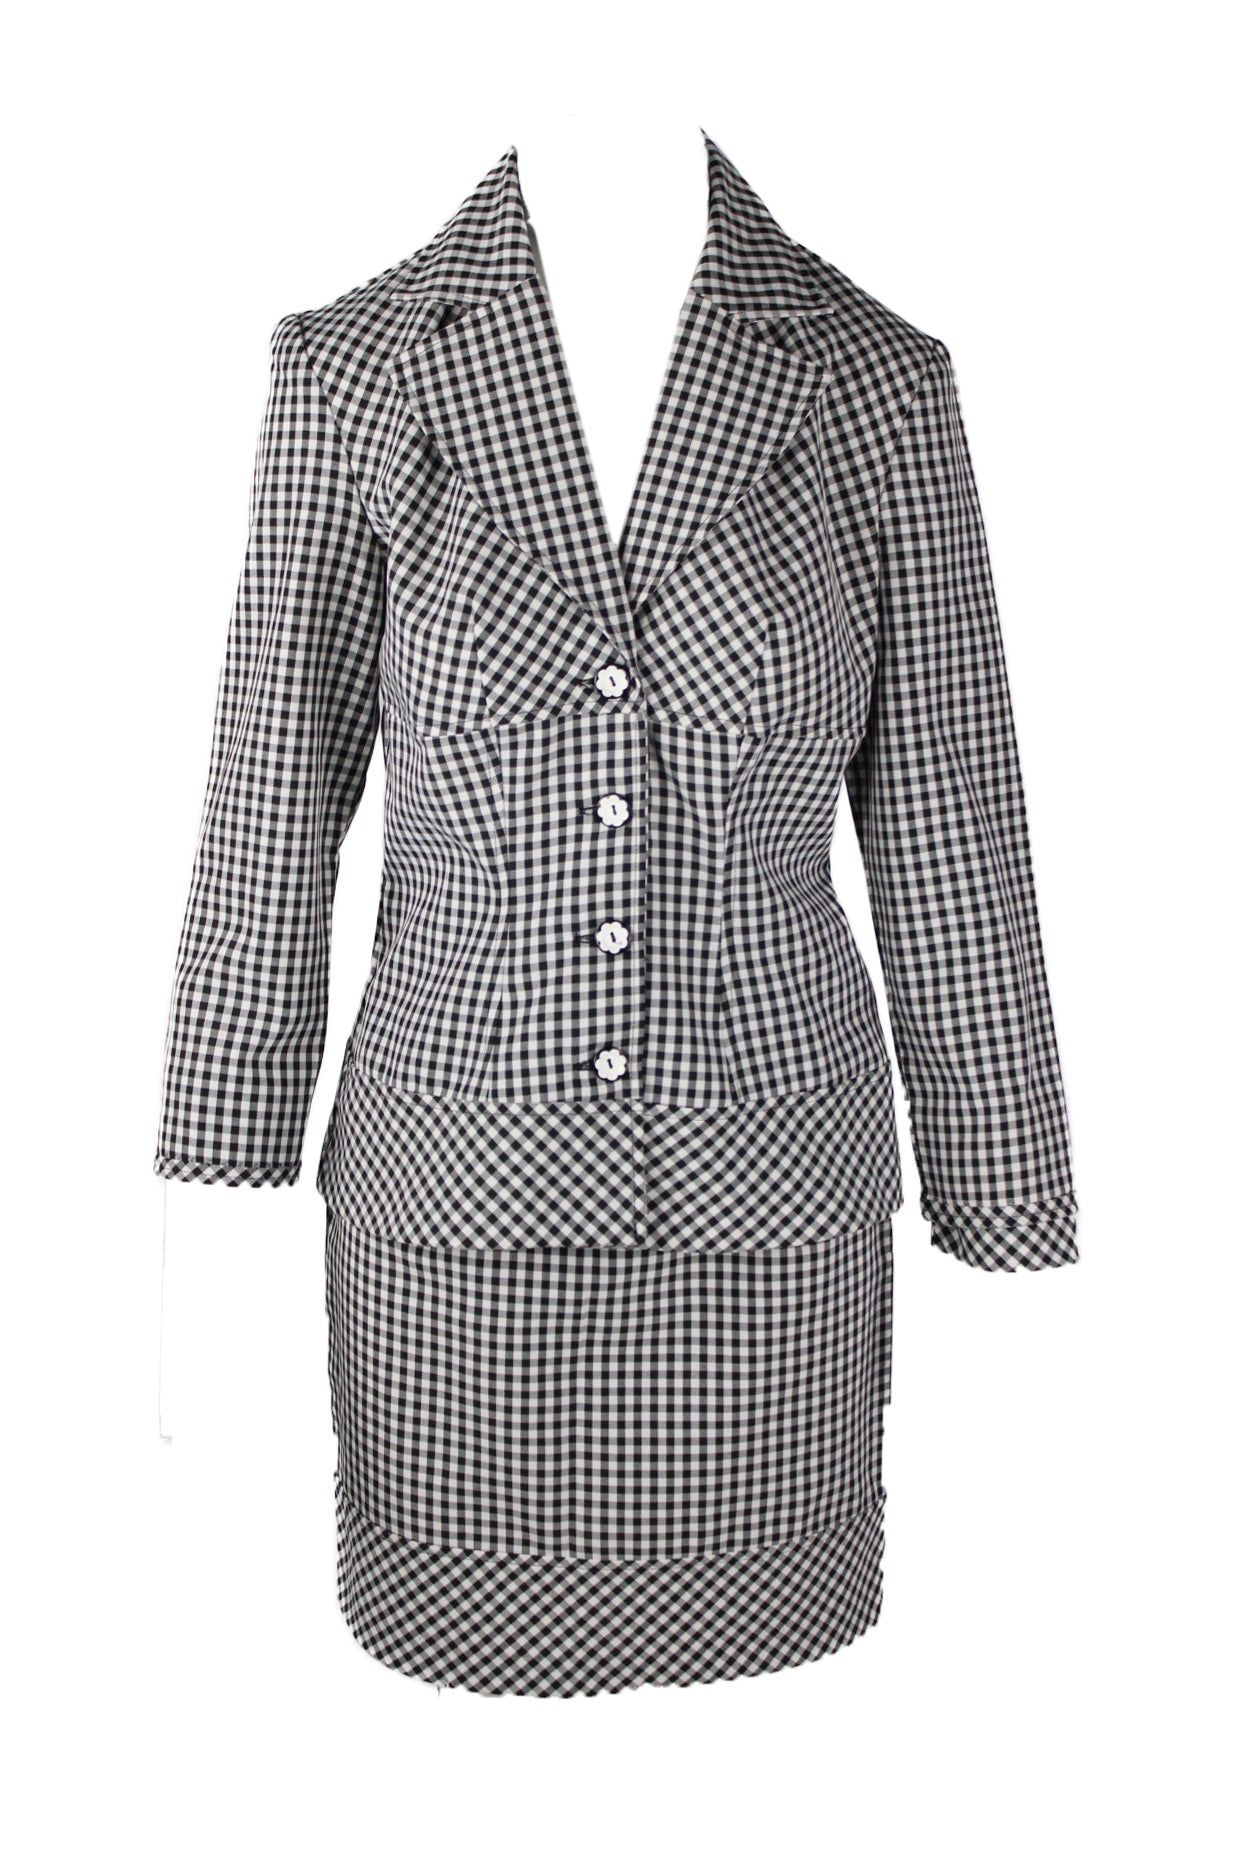 description: vintage 90's black and white gingham print two piece set. features long sleeve blazer with single breasted floral design button closure at center front, and lapel collar, fitted skirt with zipper closure at back. 